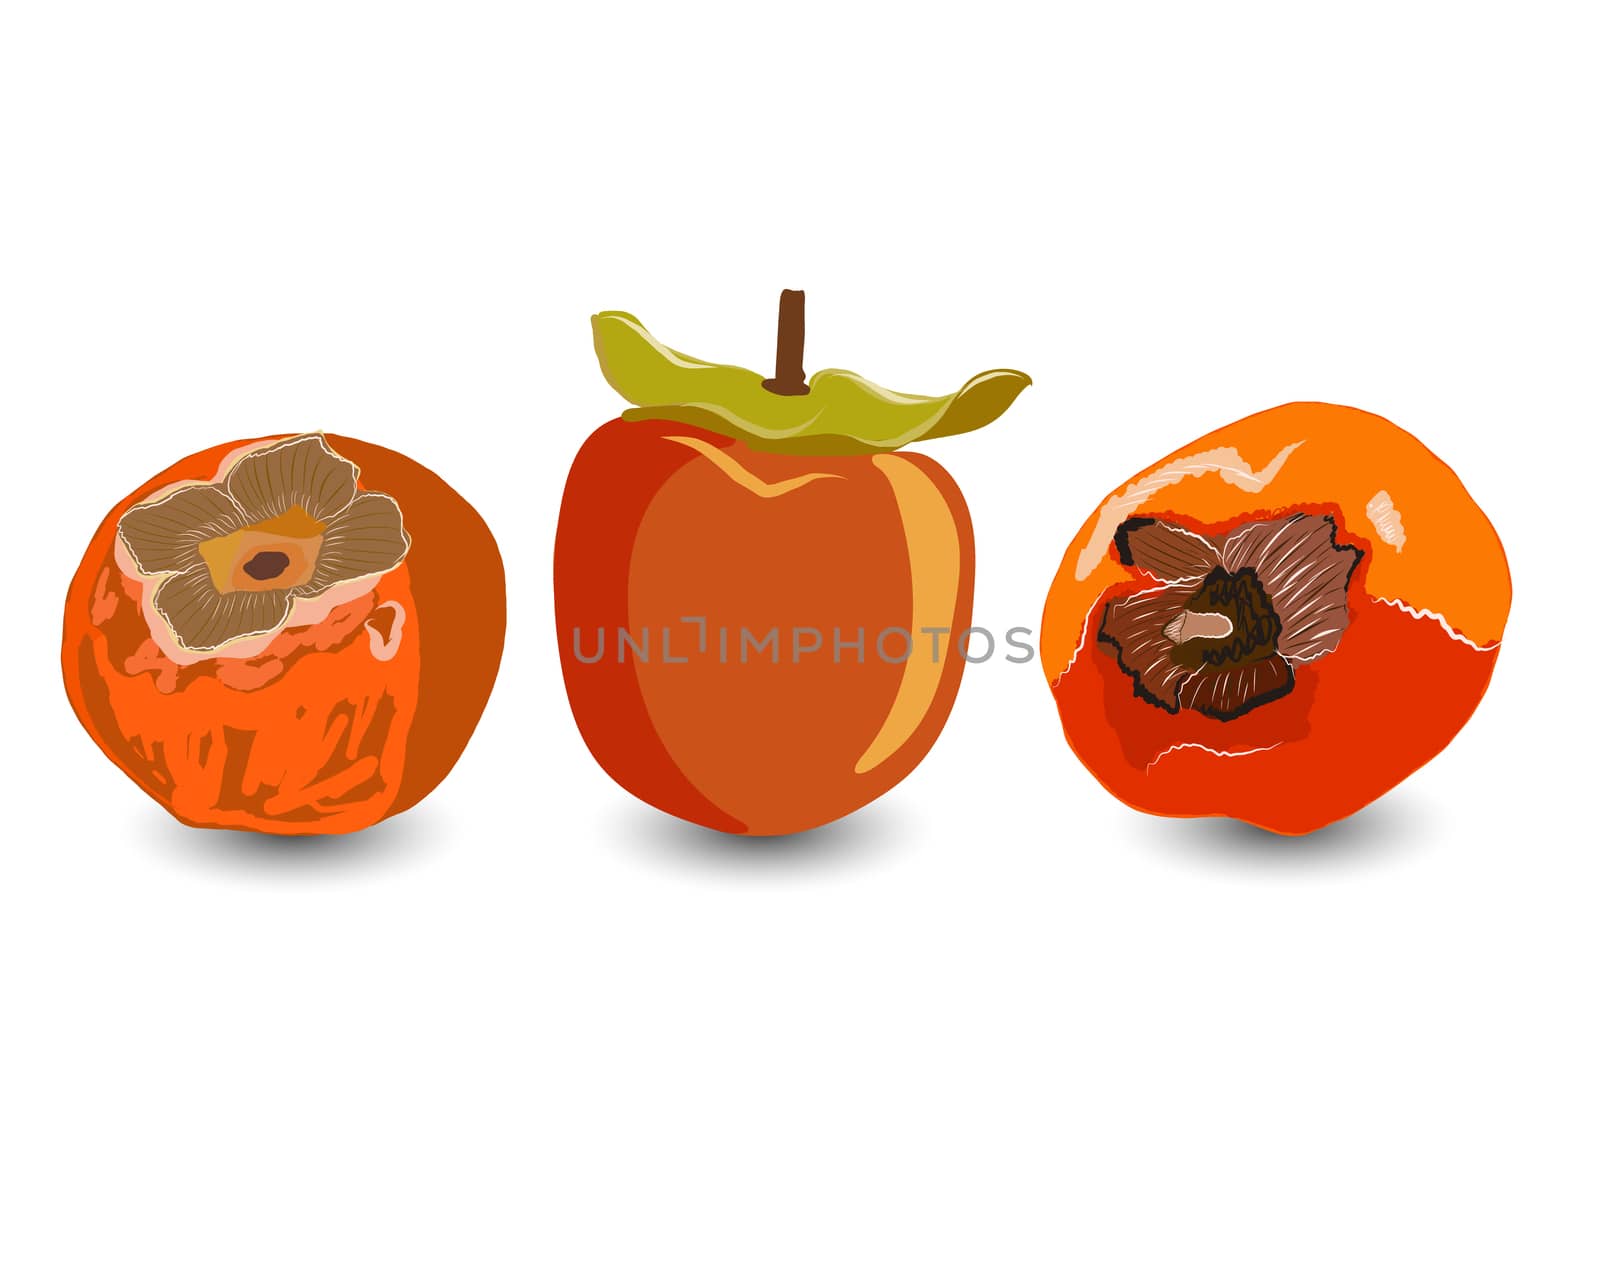 Tropical sharon fruit isolated on white background vector illustration. Orange persimmon whole and cut for design, banner, menu, poster, apparel.